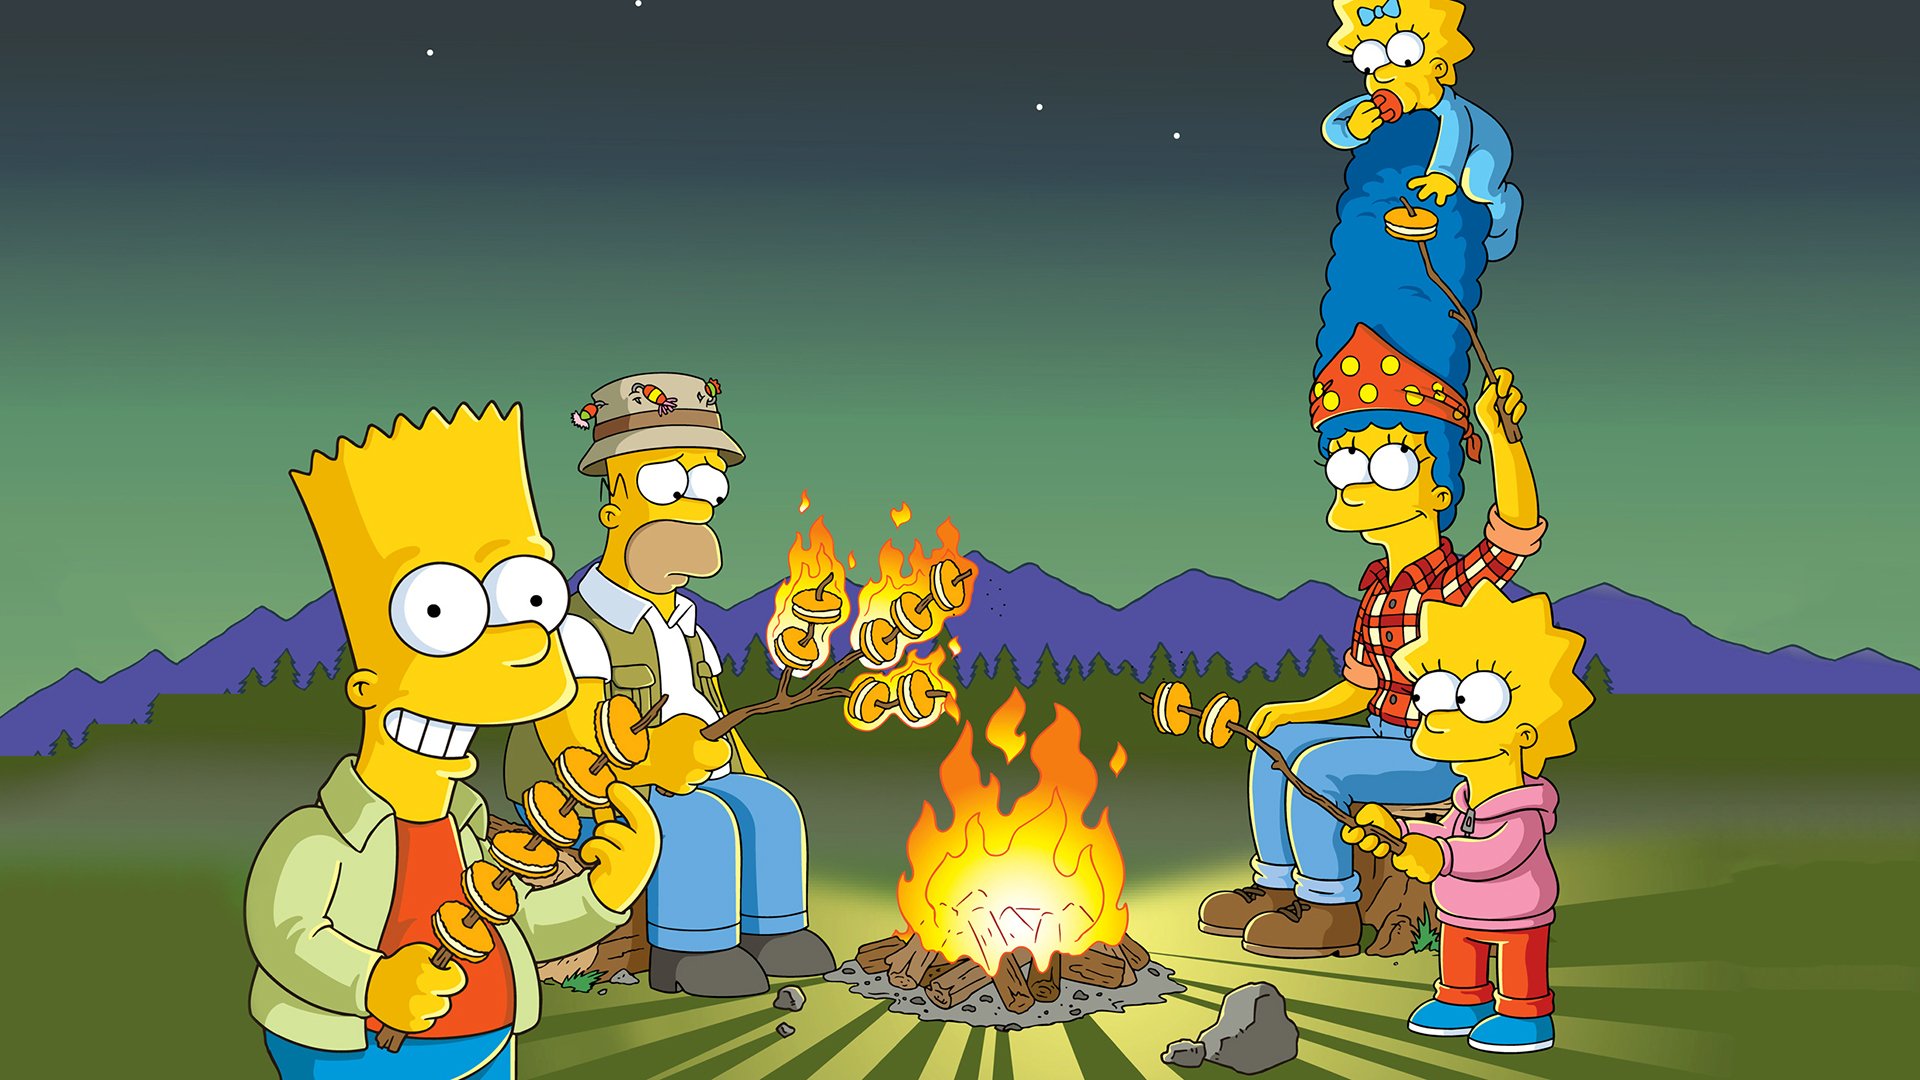 The Simpsons Wallpaper Hd - Cartoon Characters Around A Campfire - HD Wallpaper 